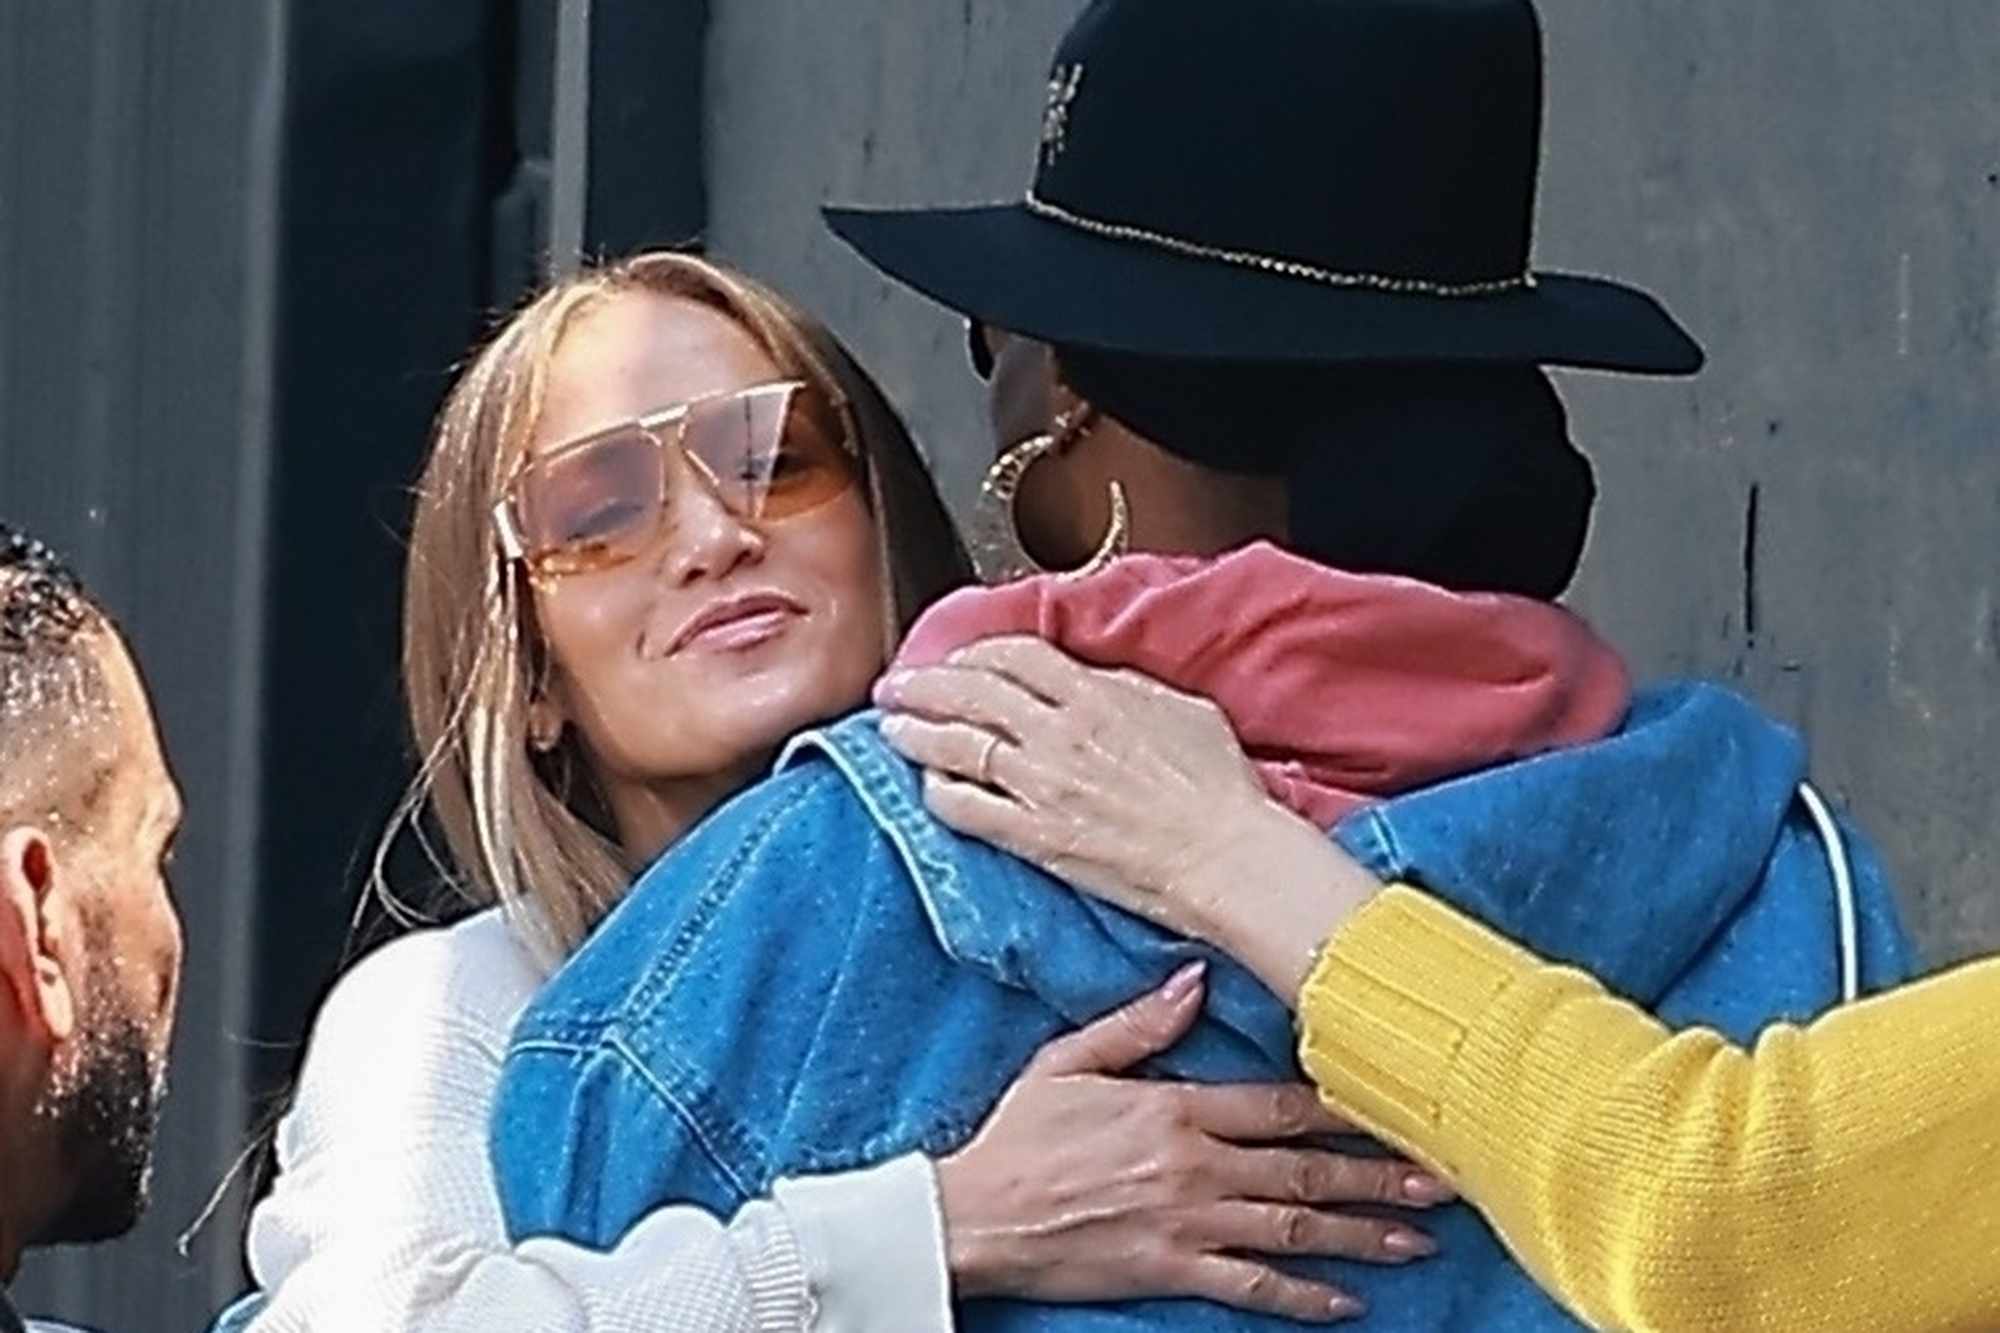 Jennifer Lopez Meets with Her Team at a Dance Studio amid Tour Cancellation Announcement